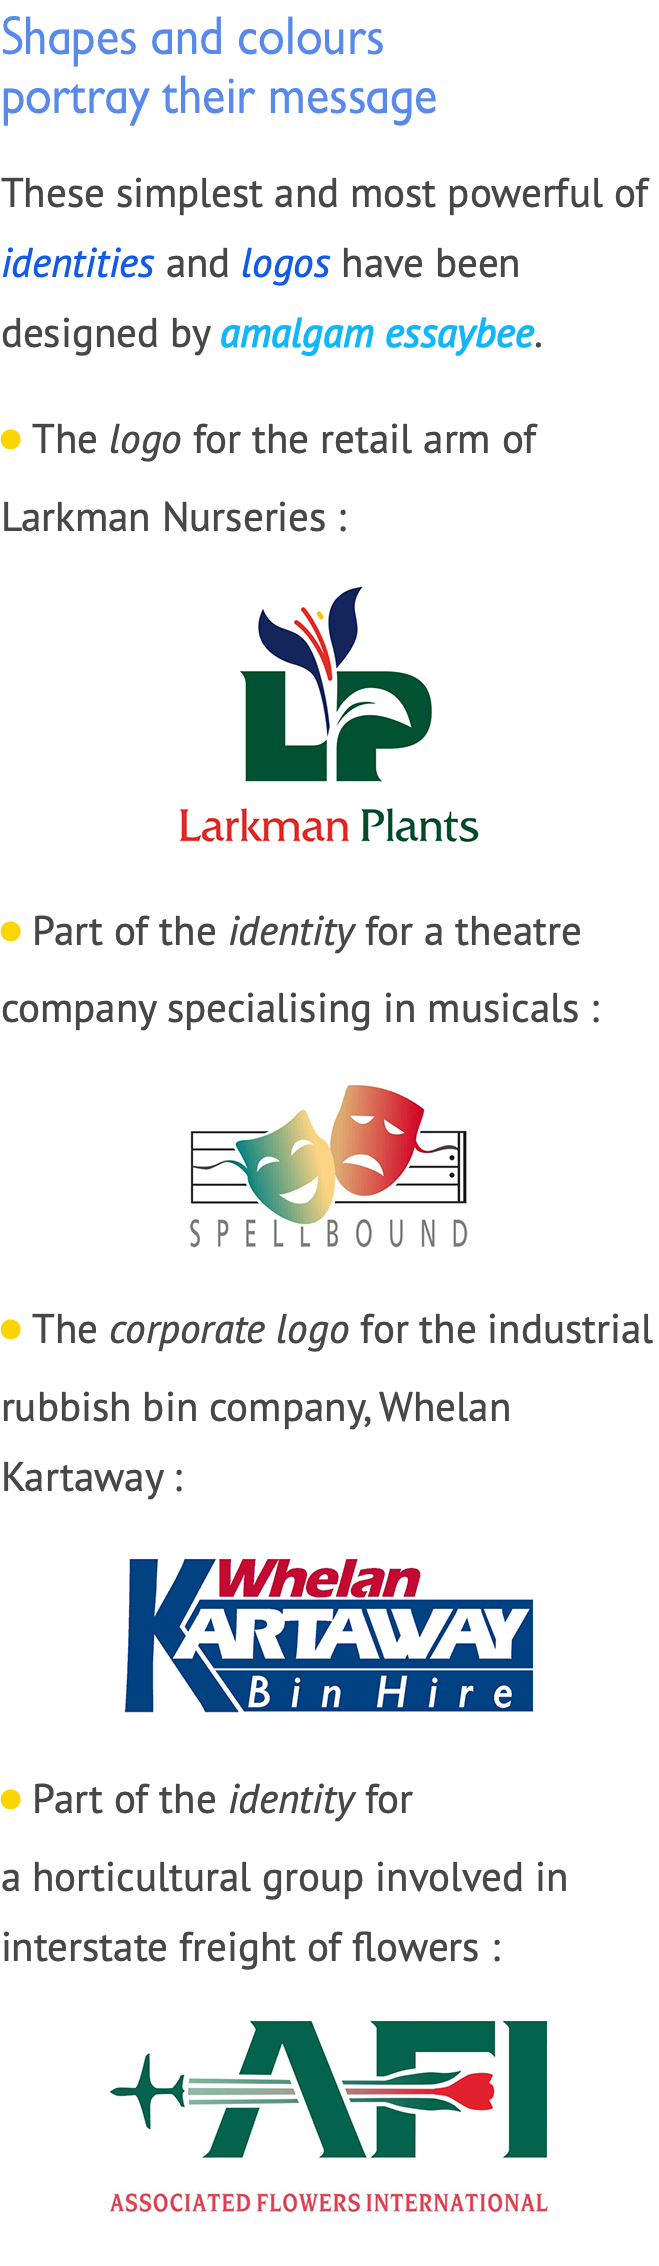 Shapes and colours  portray their message These simplest and most powerful of identities and logos have been designed by amalgam essaybee. LiThe logo for the retail arm of Larkman Nurseries : ﷯ LiPart of the identity for a theatre company specialising in musicals : ﷯ LiThe corporate logo for the industrial rubbish bin company, Whelan Kartaway : ﷯ LiPart of the identity for aihorticultural group involved in interstate freight of flowers : ﷯